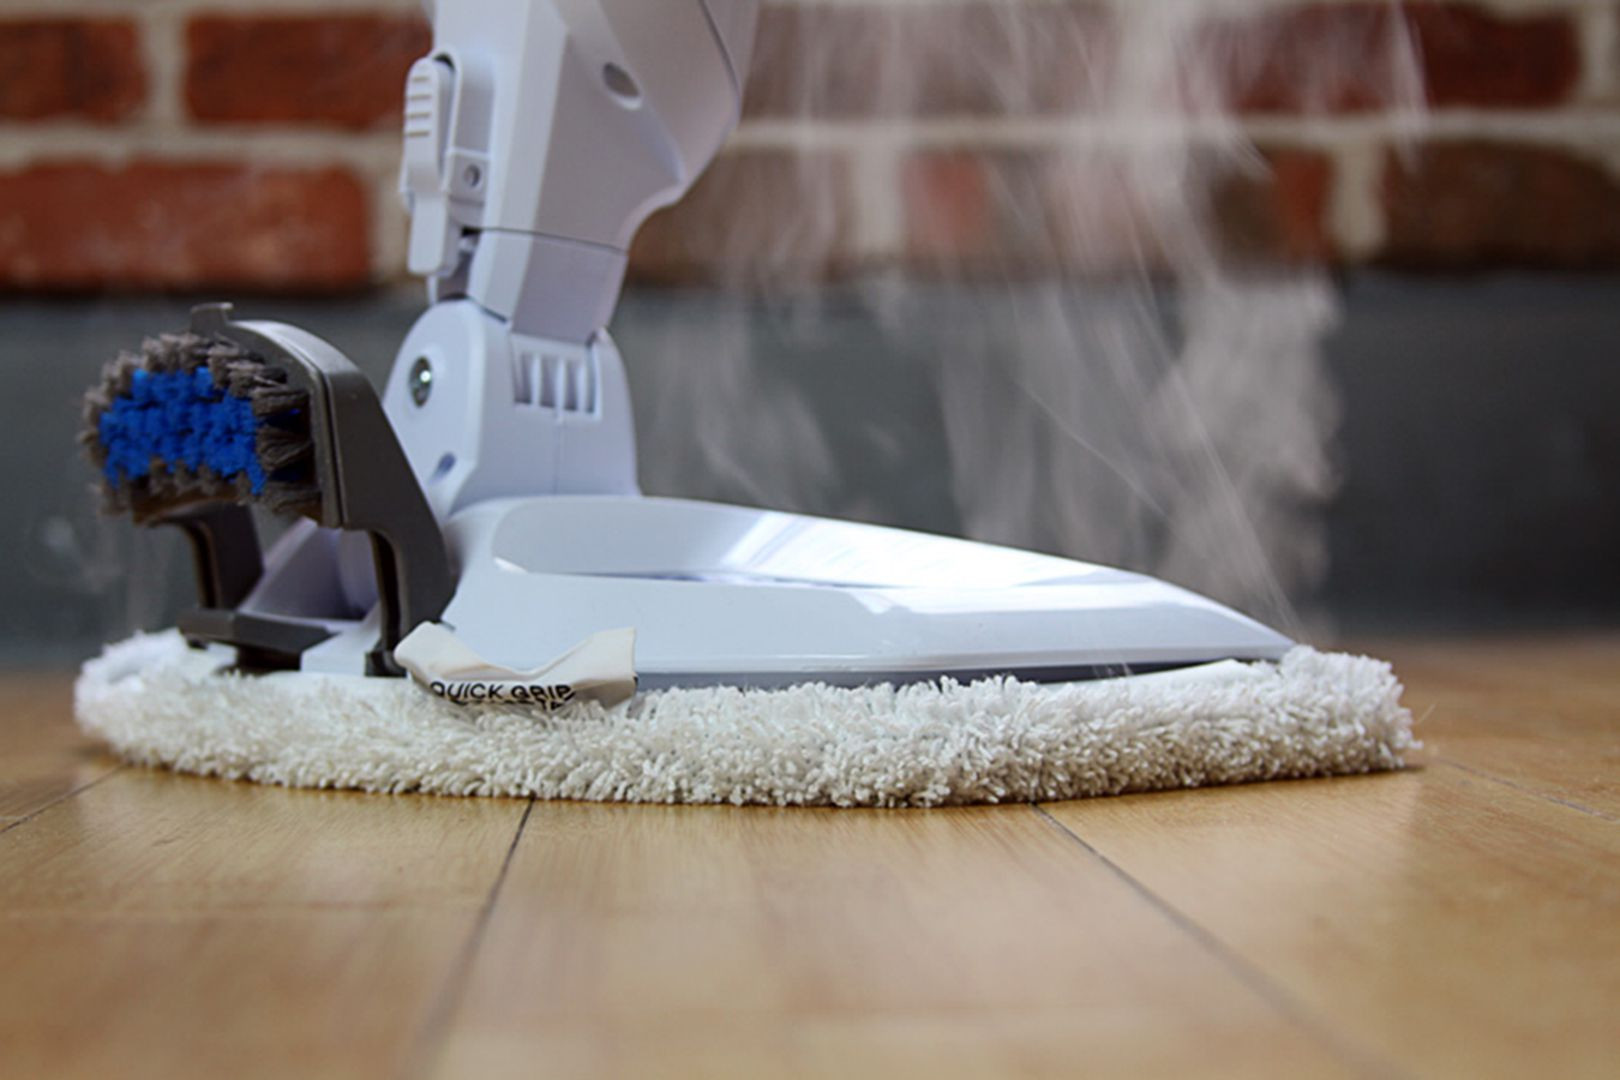 13 Lovely Hardwood Floor Steam Cleaner Reviews 2024 free download hardwood floor steam cleaner reviews of use a steam mop efficiently if you want clean floors regarding steam mop 33683344996 29f26c2761 o 58f116ab3df78cd3fc1c2c16